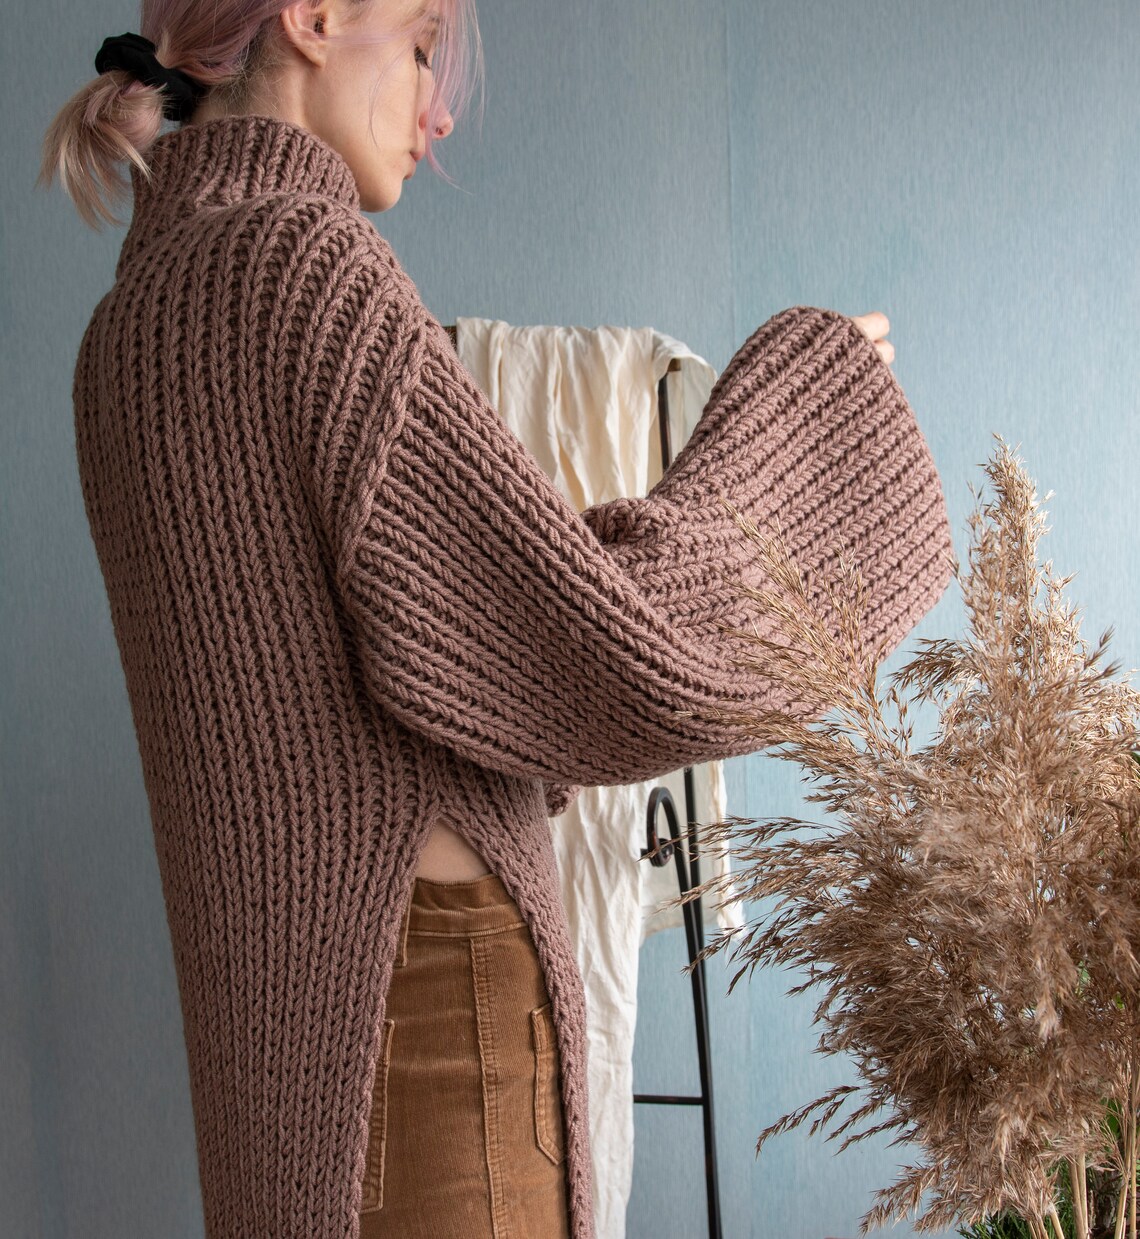 Handknit Asymmetric Turtleneck Sweater With Wide Sleeves. Maxi - Etsy